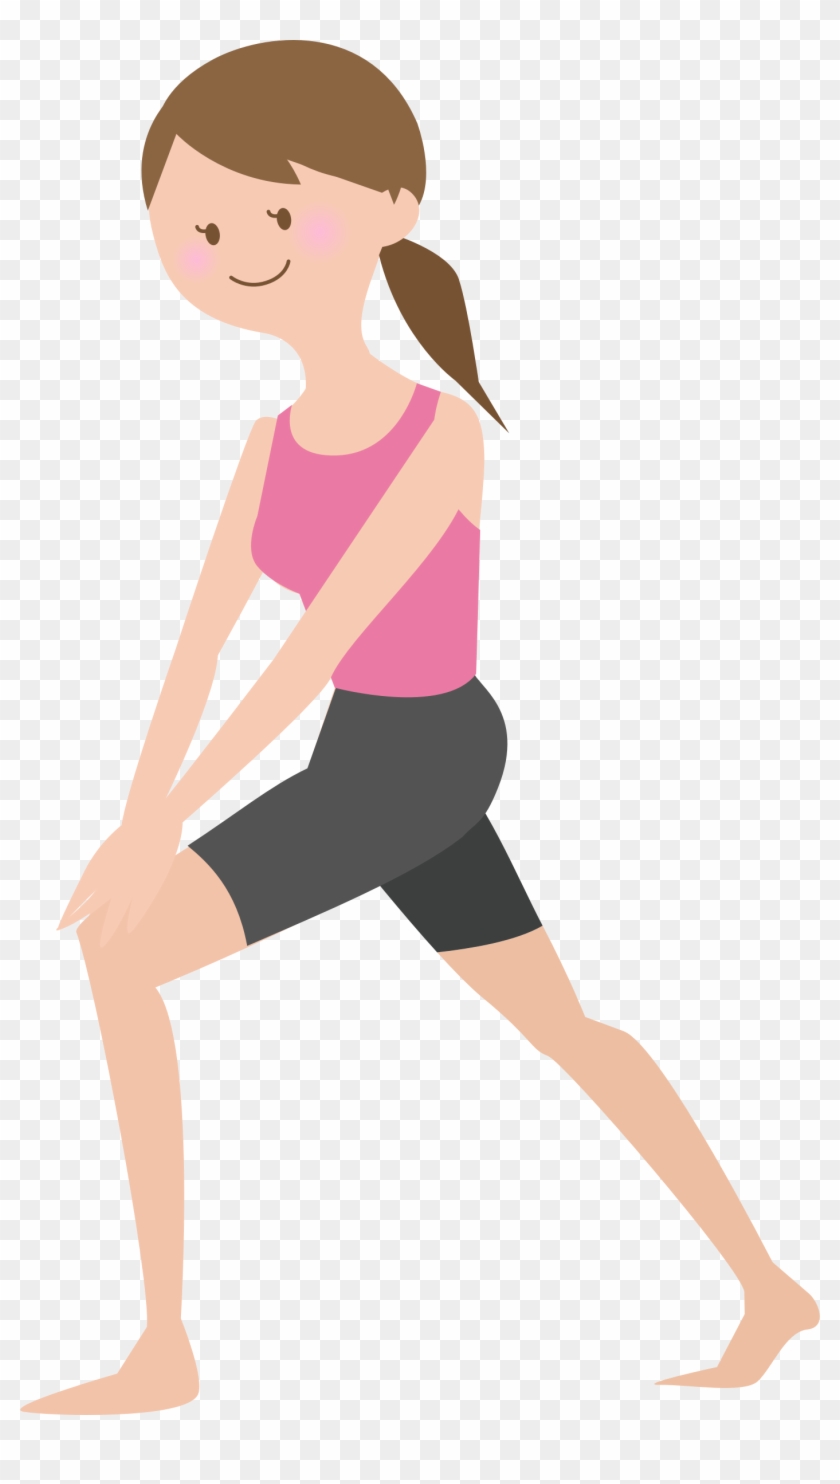 Stretching Images - Clipart - Stretching Vector - Png Download #4888092